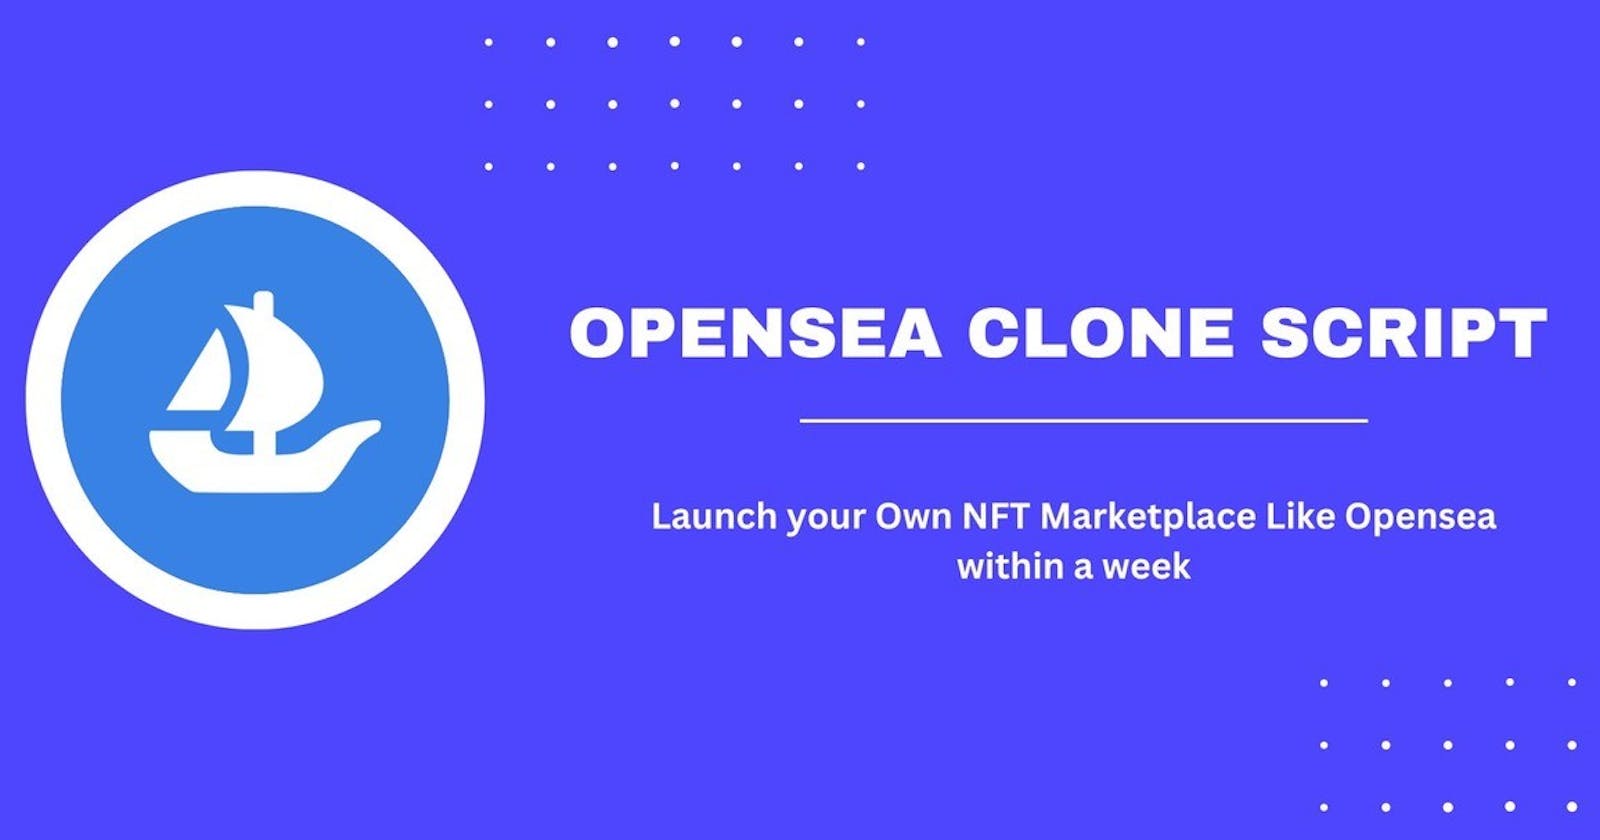 Is the Opensea Clone Script the Best Way to Start Your NFT Marketplace?